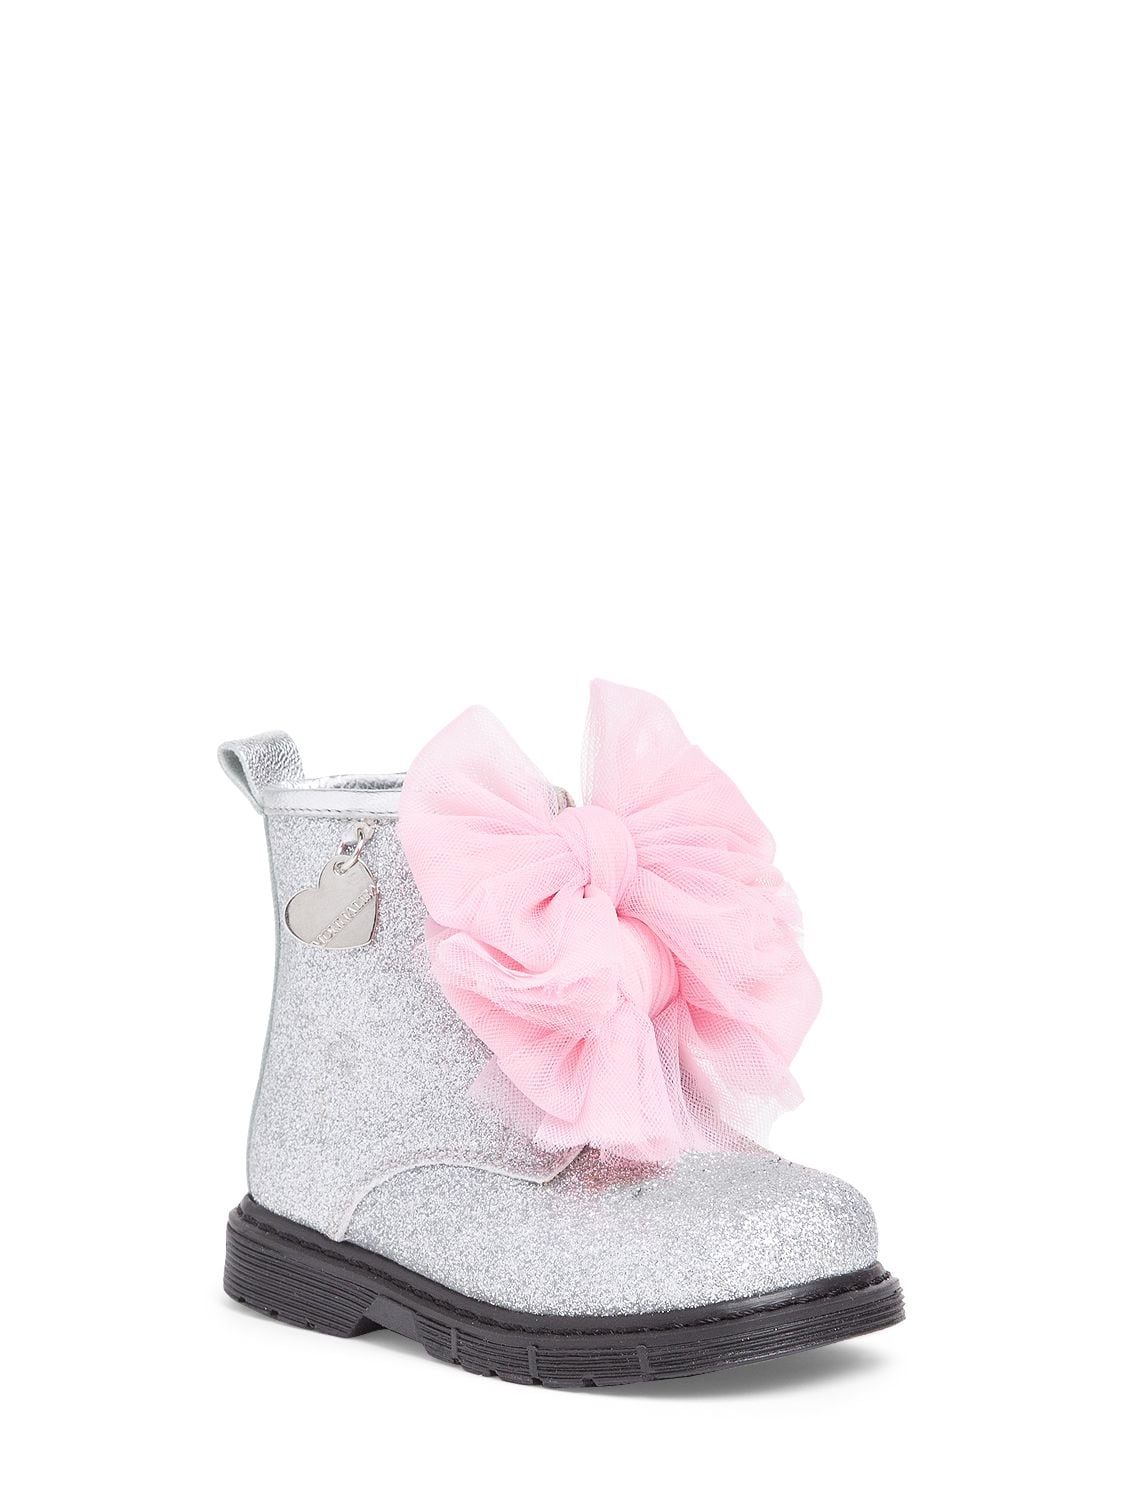 Shop Monnalisa Glittered Zip-up Boots W/ Tulle Bow In Silver